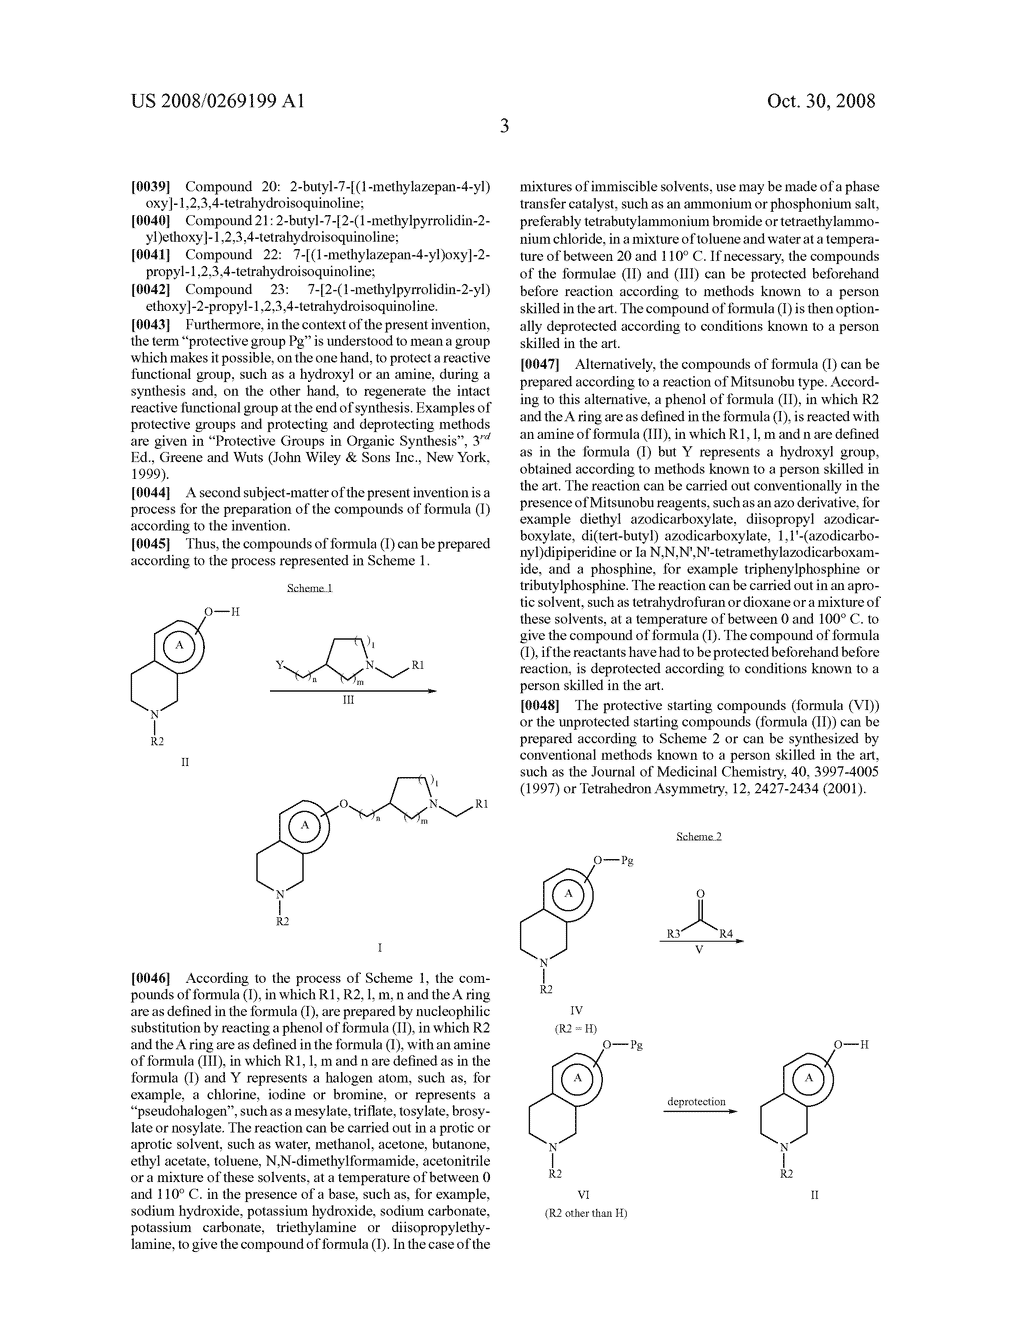 ISOQUINOLINE AND BENZO[H]ISOQUINOLINE DERIVATIVES, PREPARATION AND THERAPEUTIC USE THEREOF AS ANTAGONISTS OF THE HISTAMINE H3 RECEPTOR - diagram, schematic, and image 04